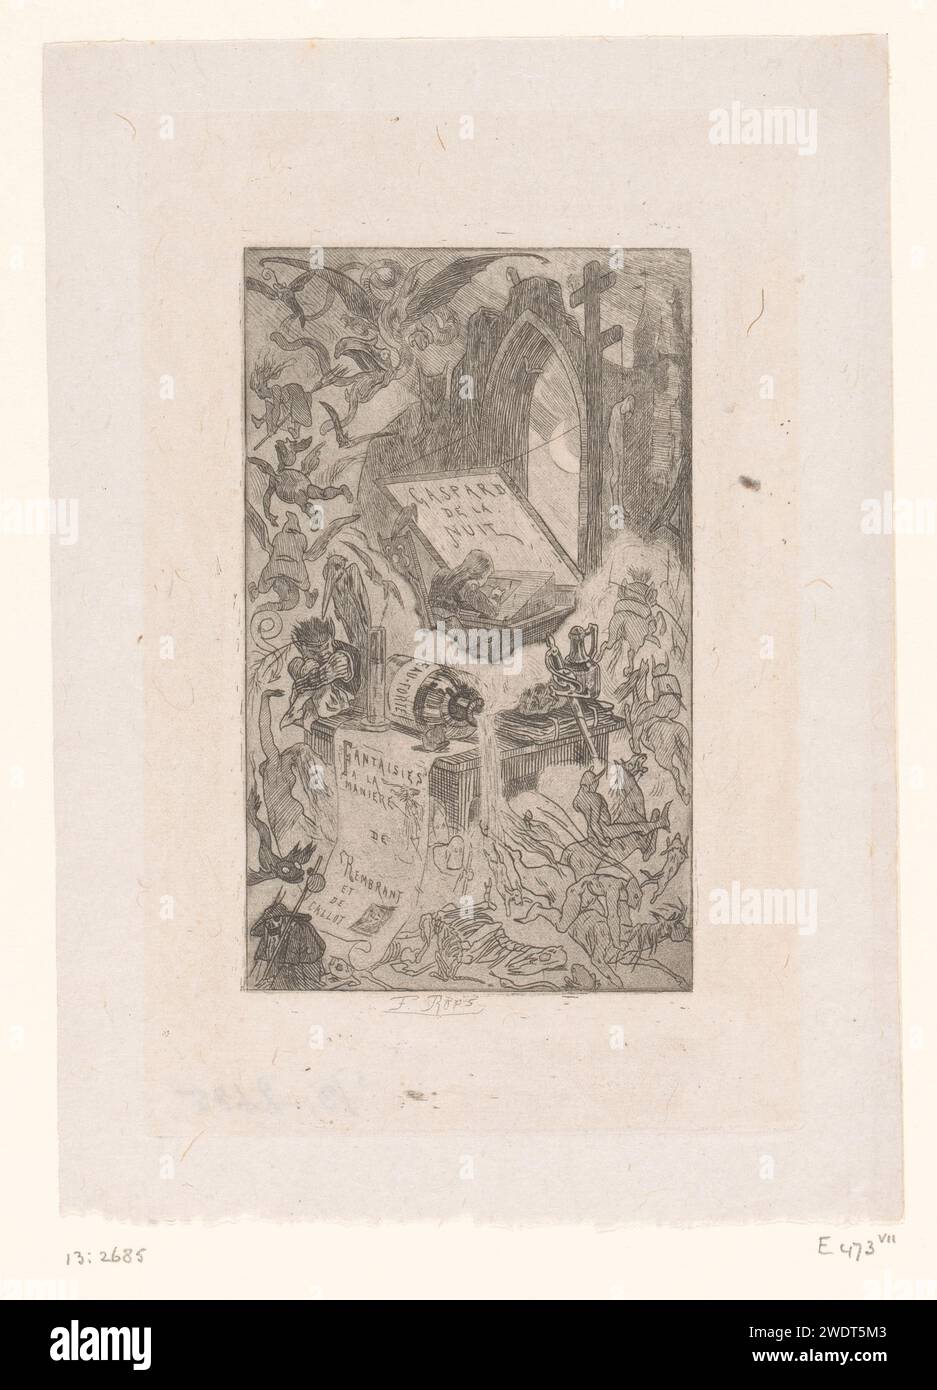 Devils, witches and samples appear from a fallen bottle acid, Félicien Rops, 1868 print   paper etching / drypoint witch, sorceress. devil(s) and demons. nightmare Stock Photo